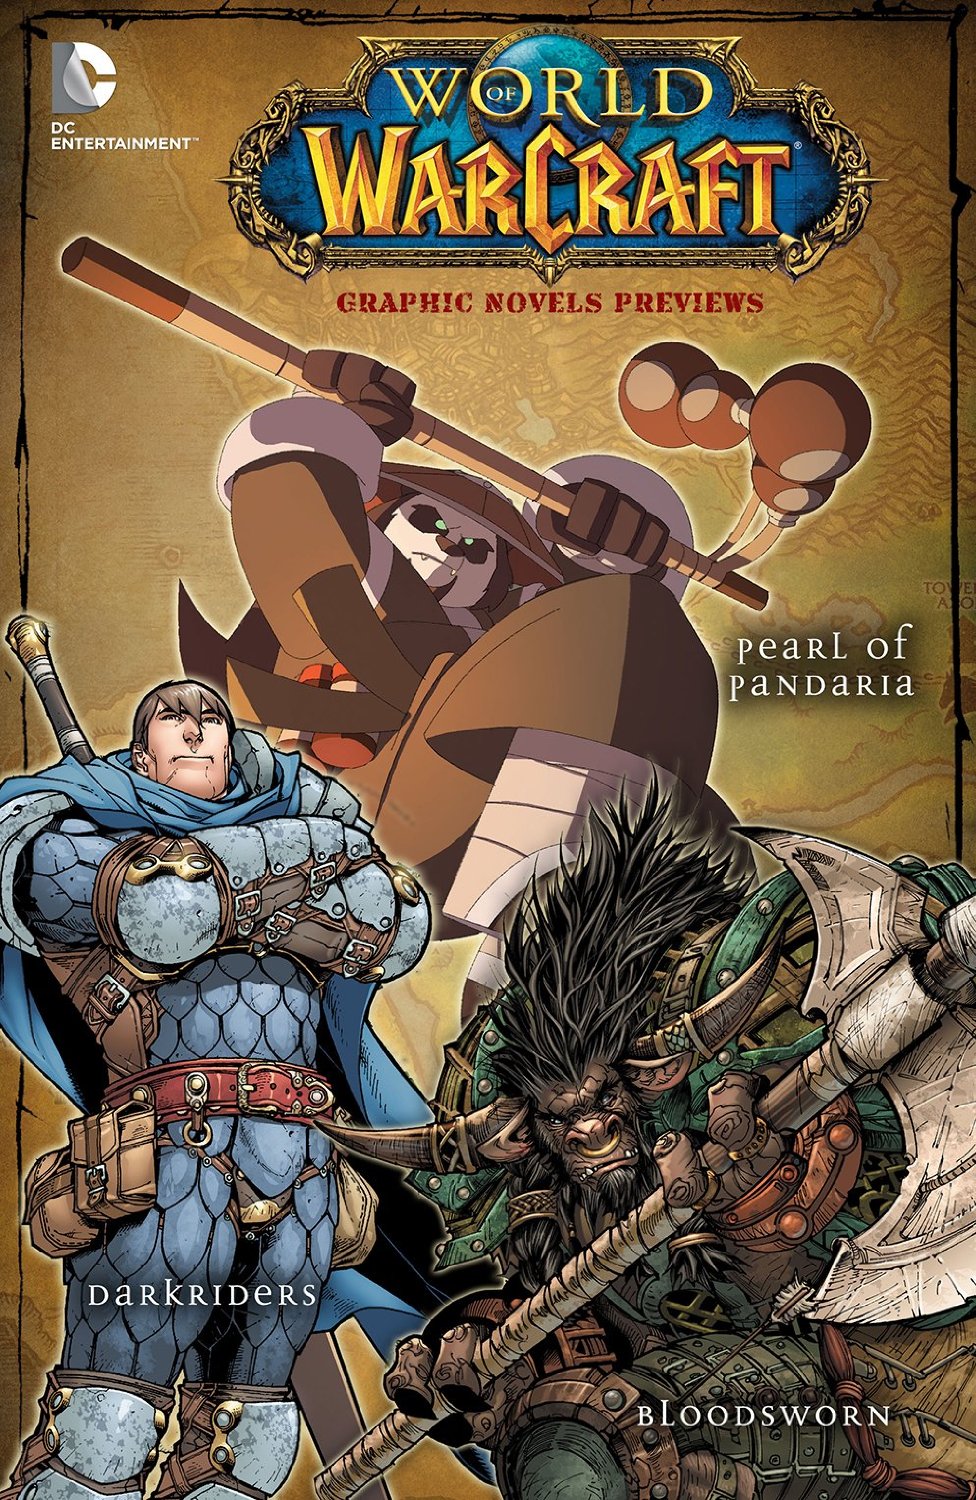 Free World of Warcraft Graphic Novel Previews on iTunes and Kindle